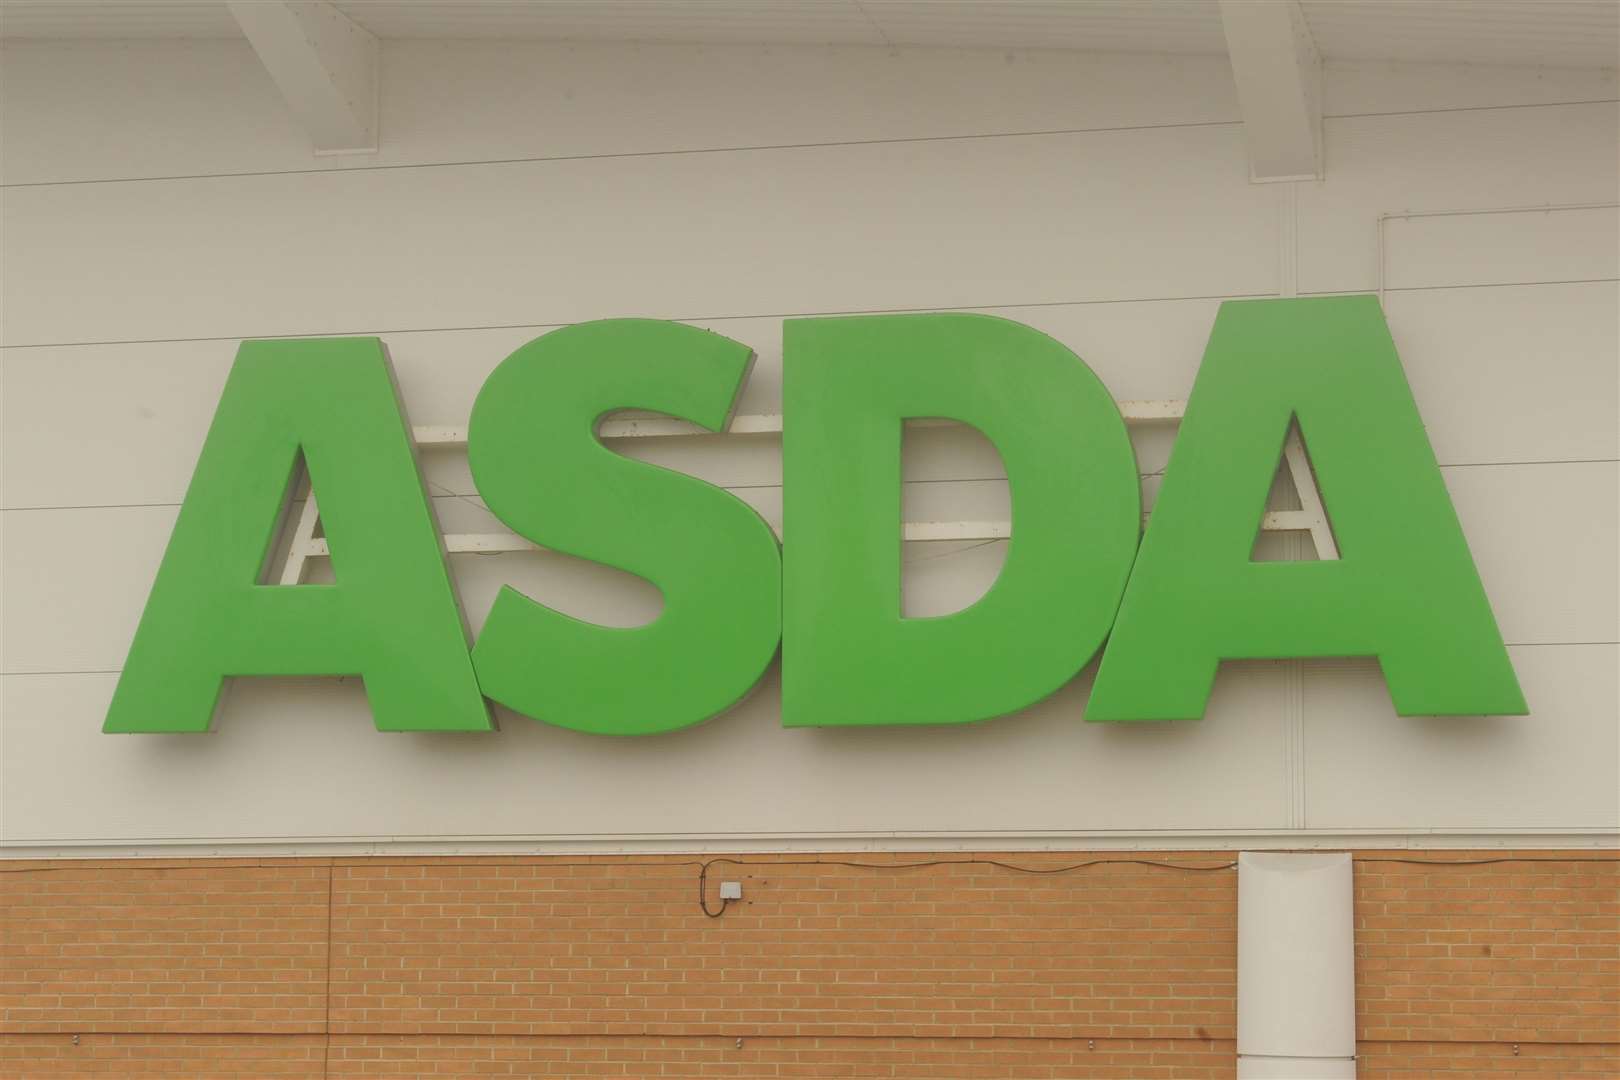 The incident happened at Asda in Maidstone Road, Chatham